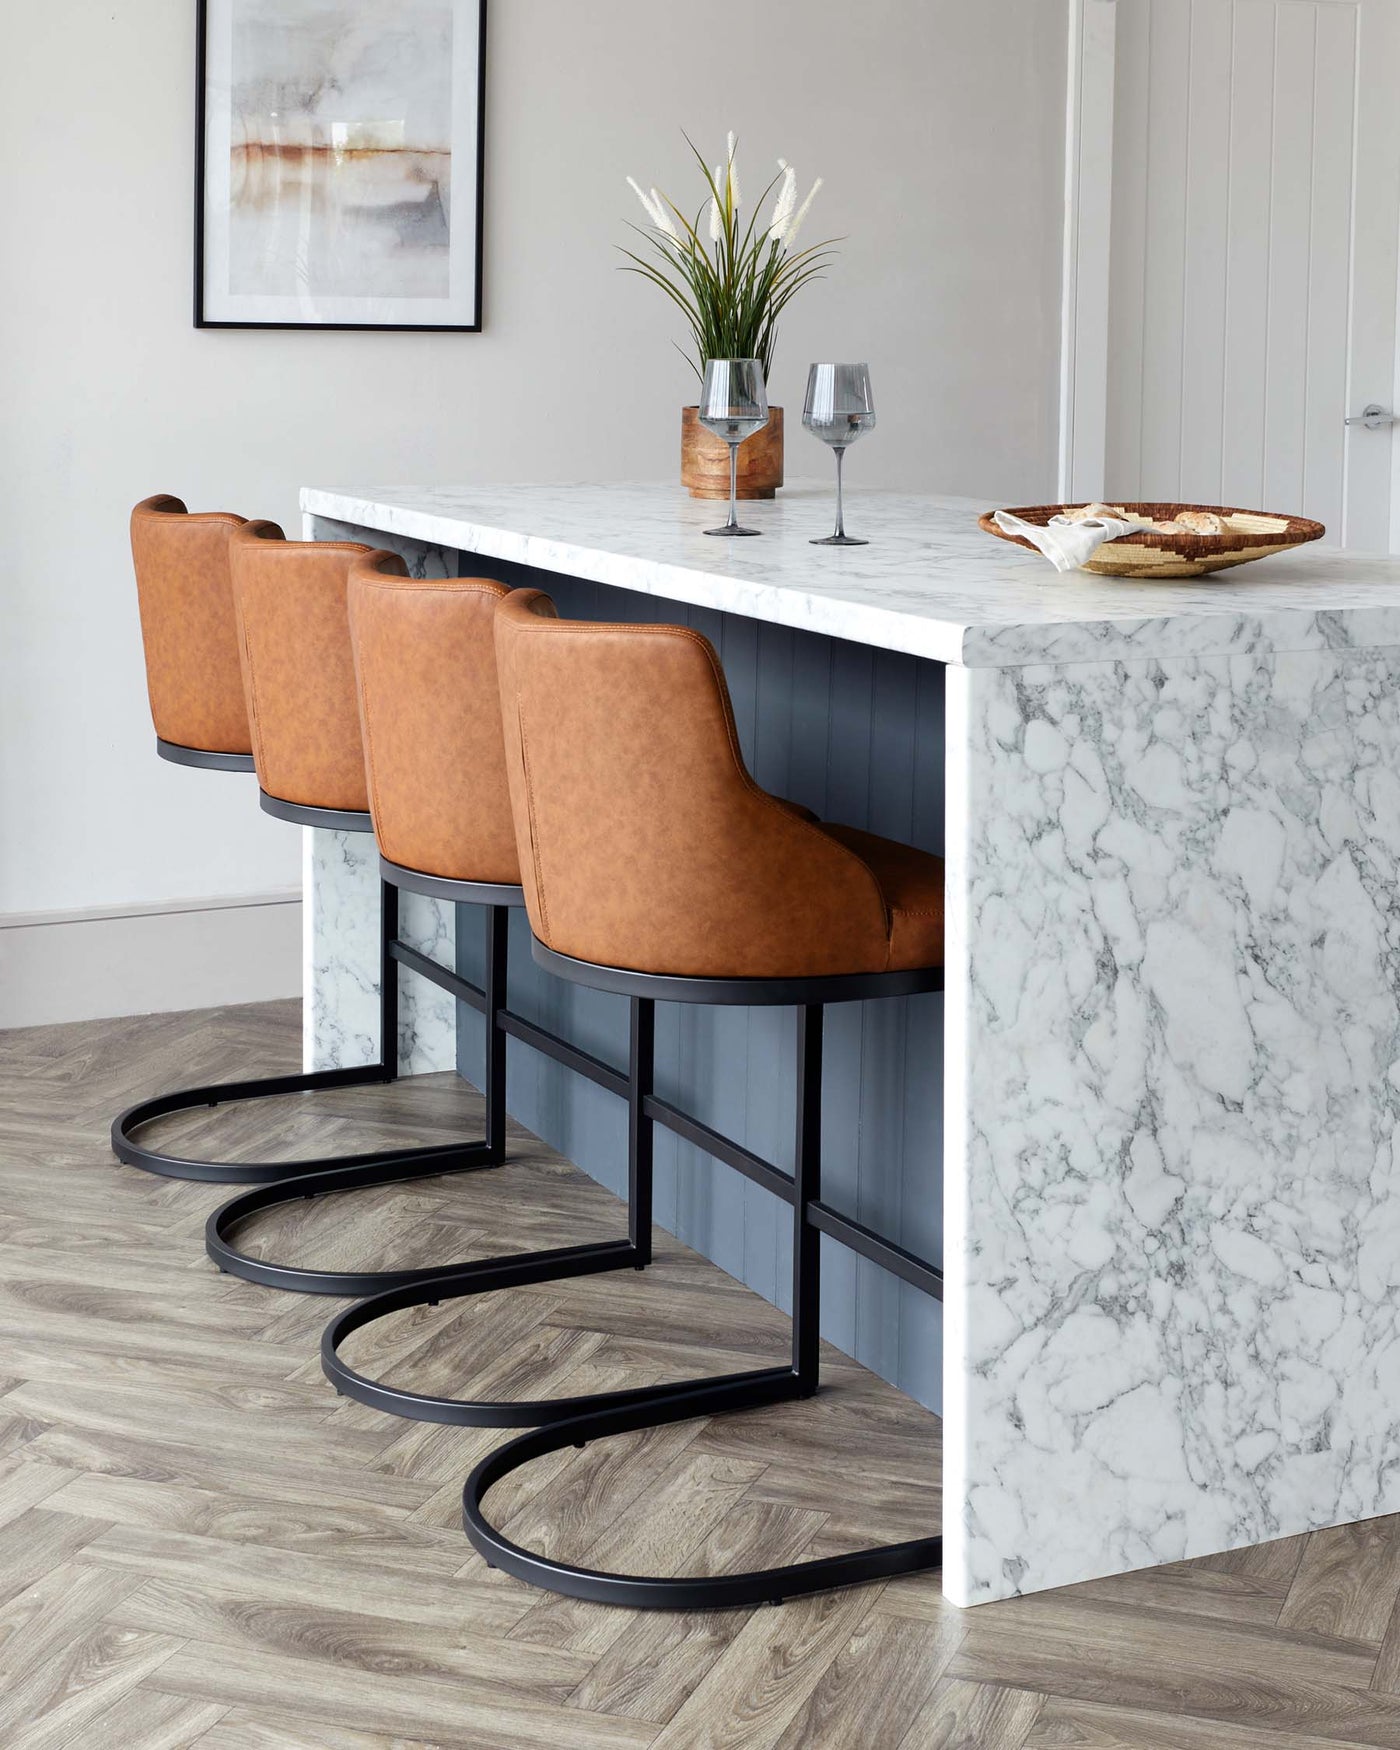 Contemporary kitchen bar area featuring a sleek white marble countertop with overhang for seating, complemented by three stylish caramel brown leather high-back barstools with black metal frame legs set on herringbone pattern wooden flooring.